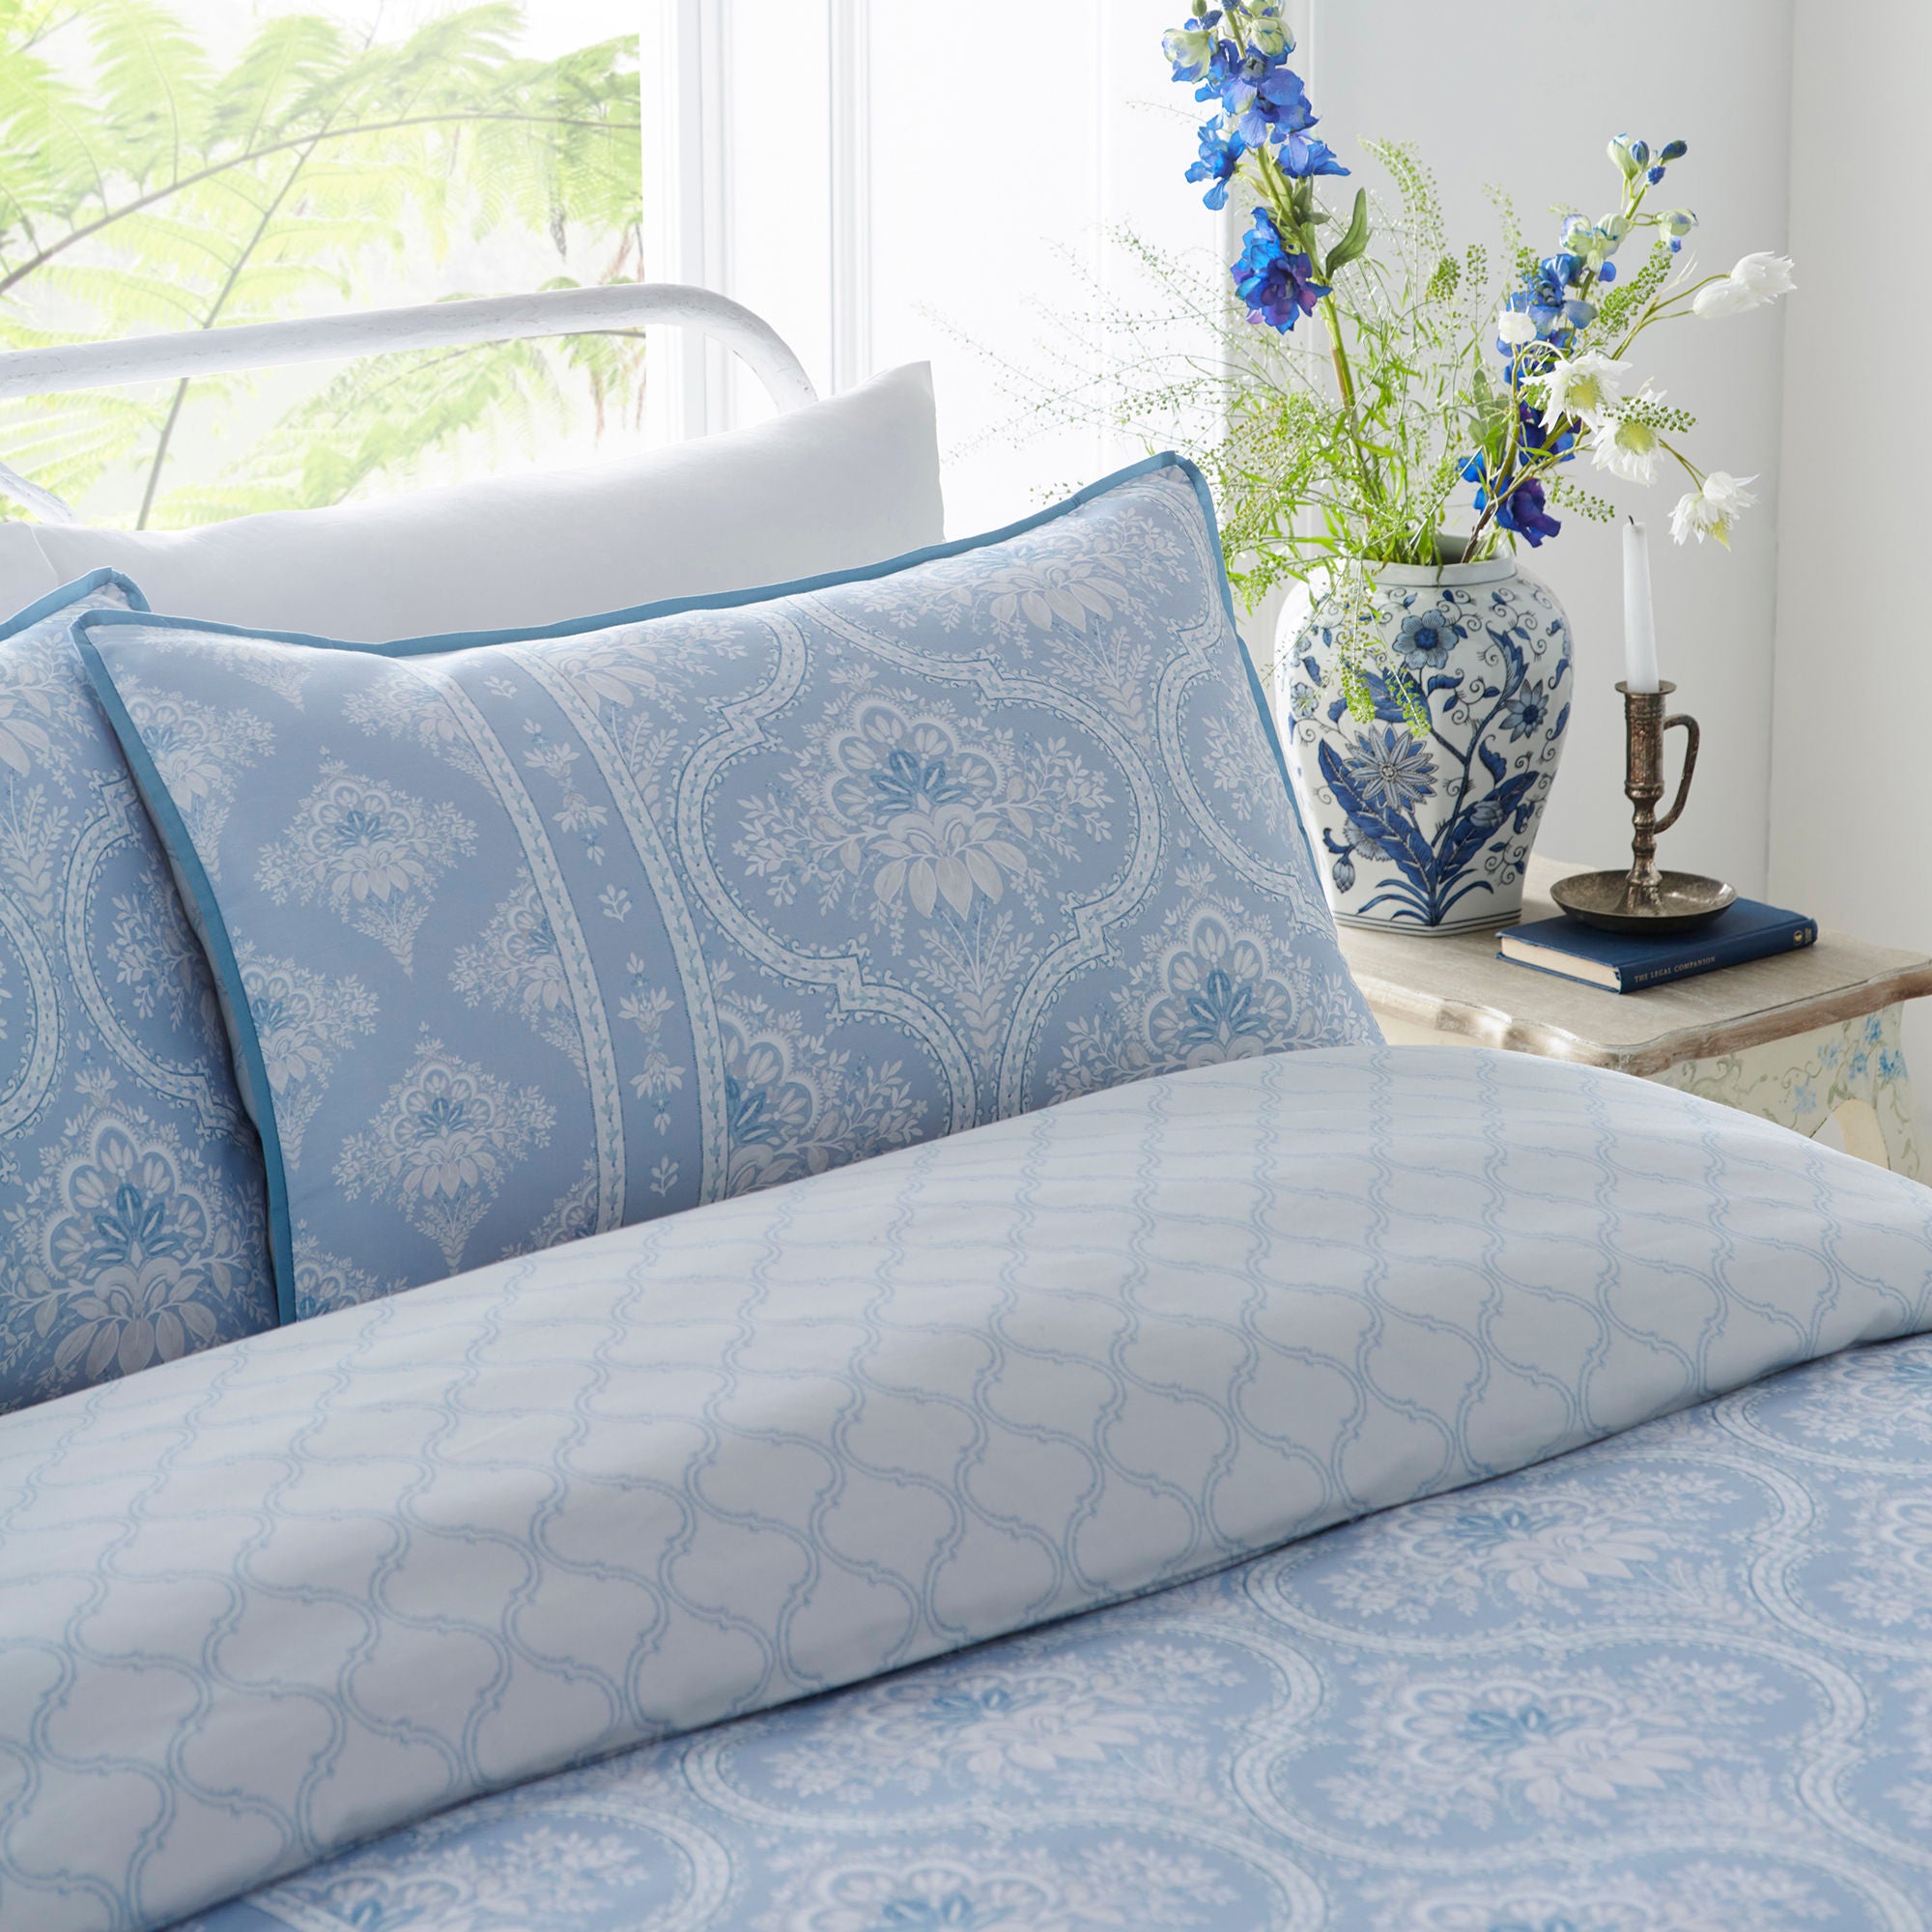 Alexia Duvet Cover Set by Appletree Heritage in Blue - Duvet Cover Set - Appletree Heritage